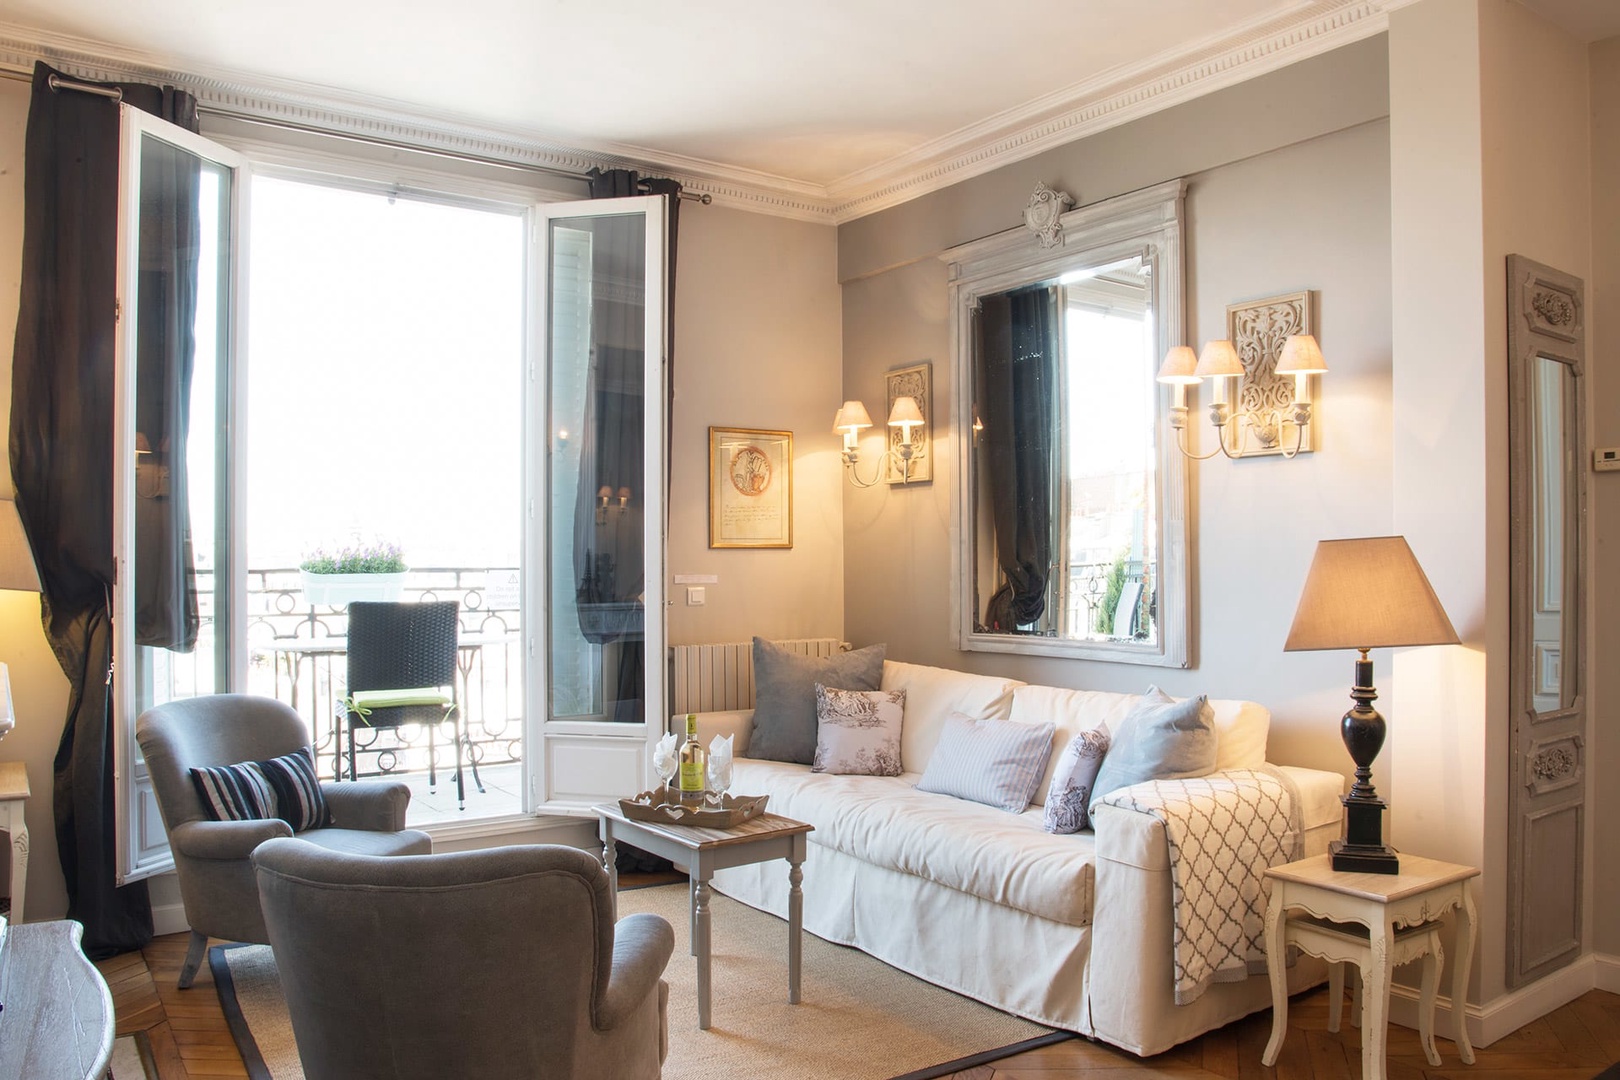 The spacious and sun-splashed rooms make it an excellent location for your Paris stay.